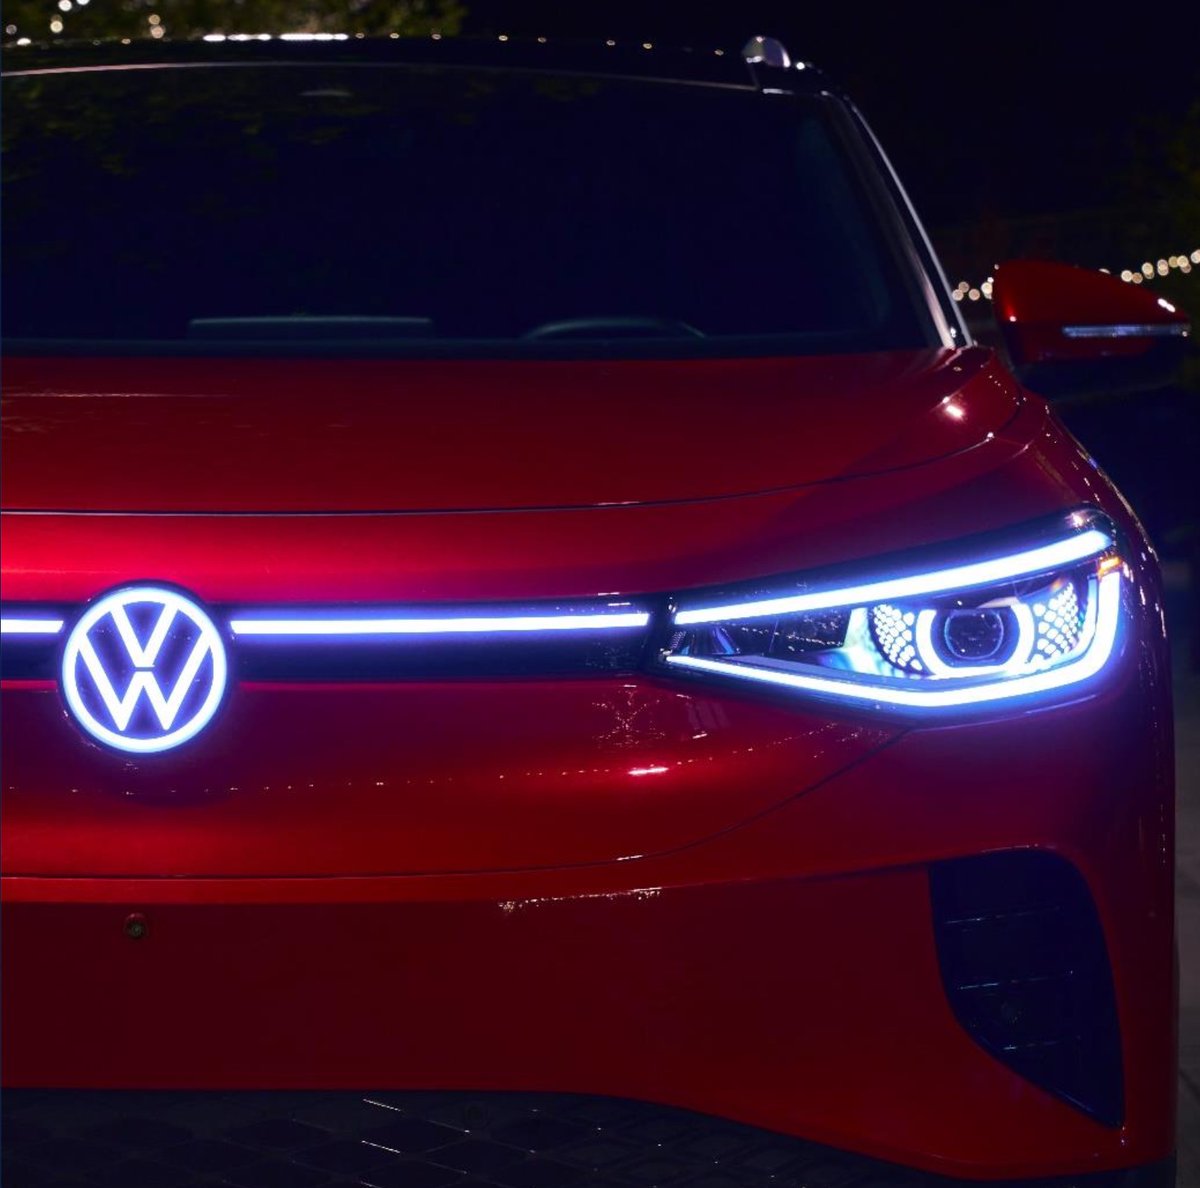 Light up the crowd. (We’re taking our inspo from the all-electric VW ID.4 SUV.) #VWPartner #VW #VWLove